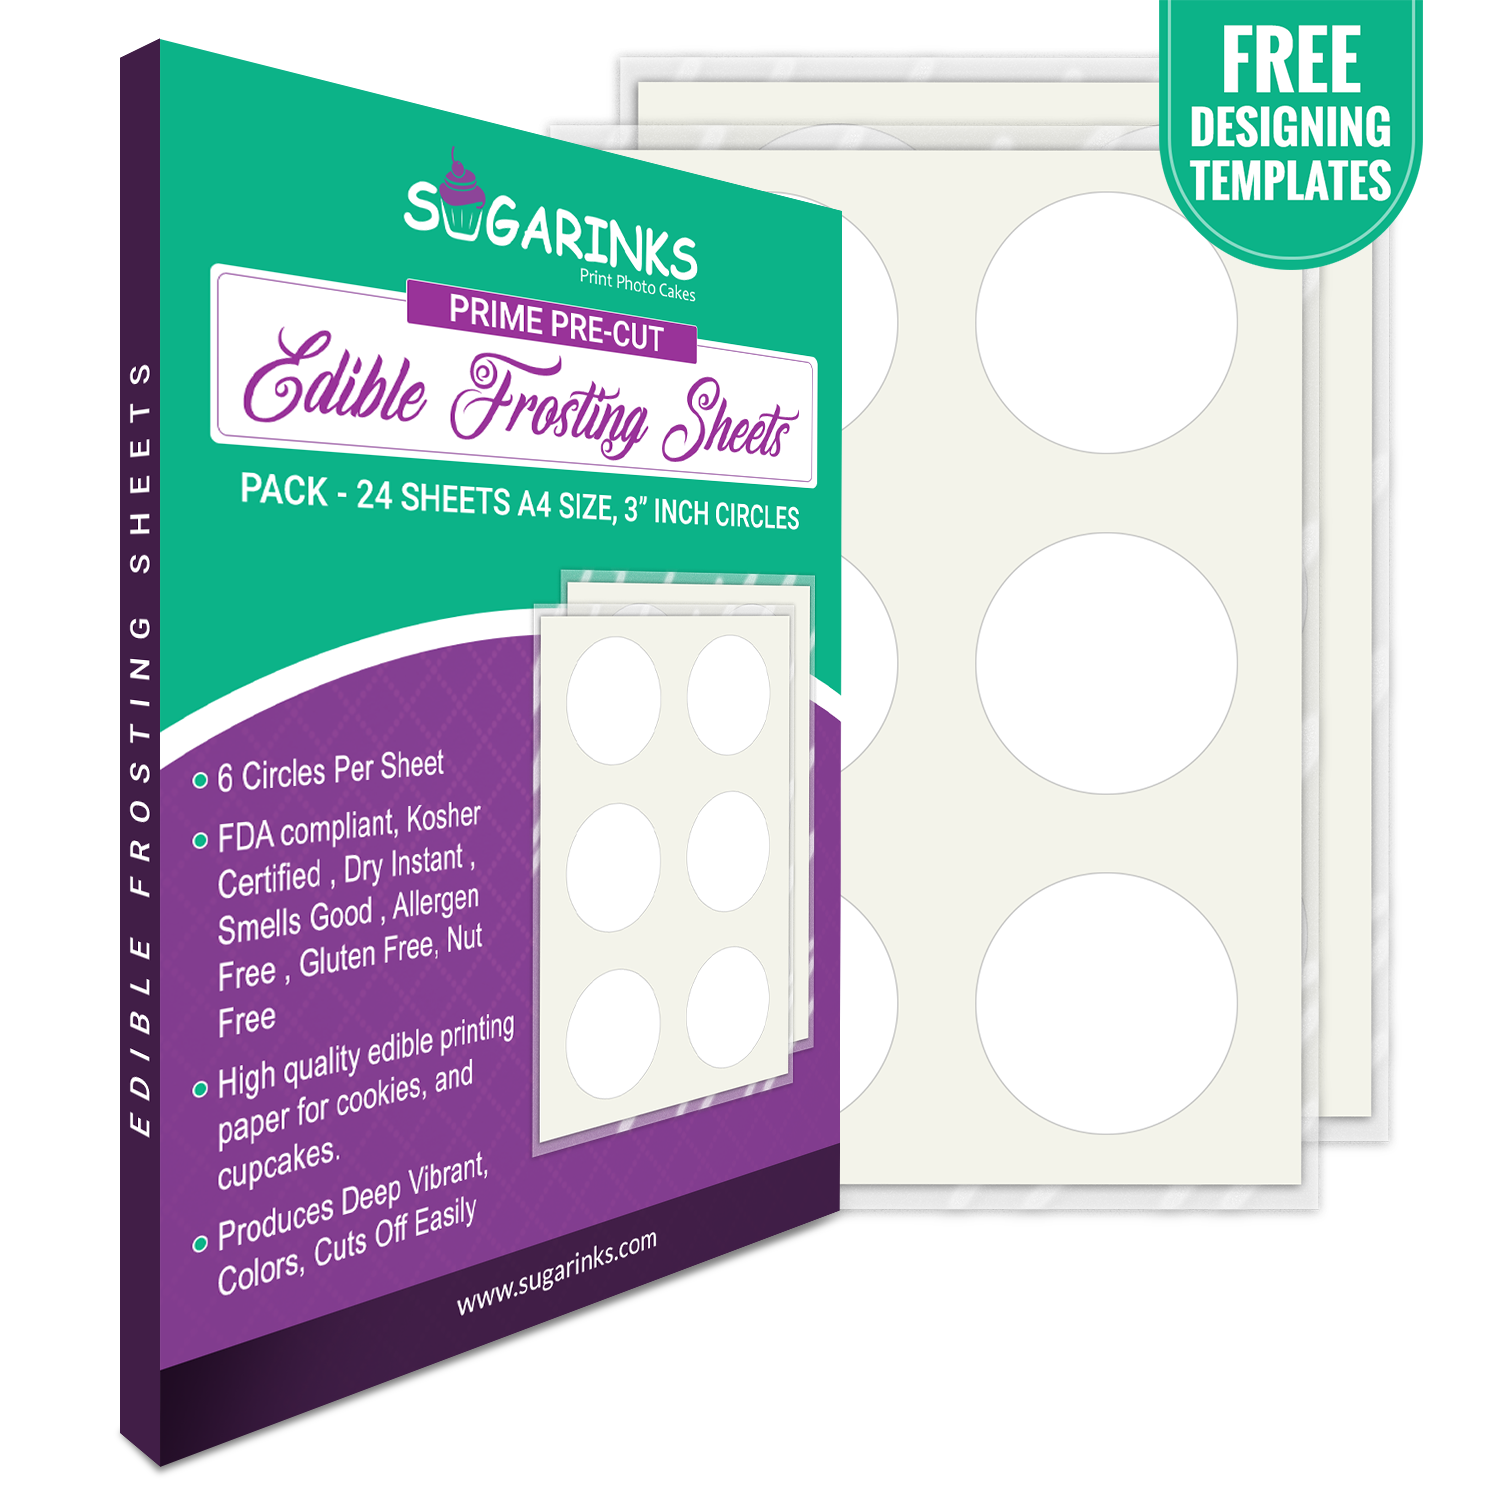 Sugarinks Premium Quality Pre-Cut Circles Frosting Sheets (3 inches, 6 Circles) - A4 Size, Pack of 24